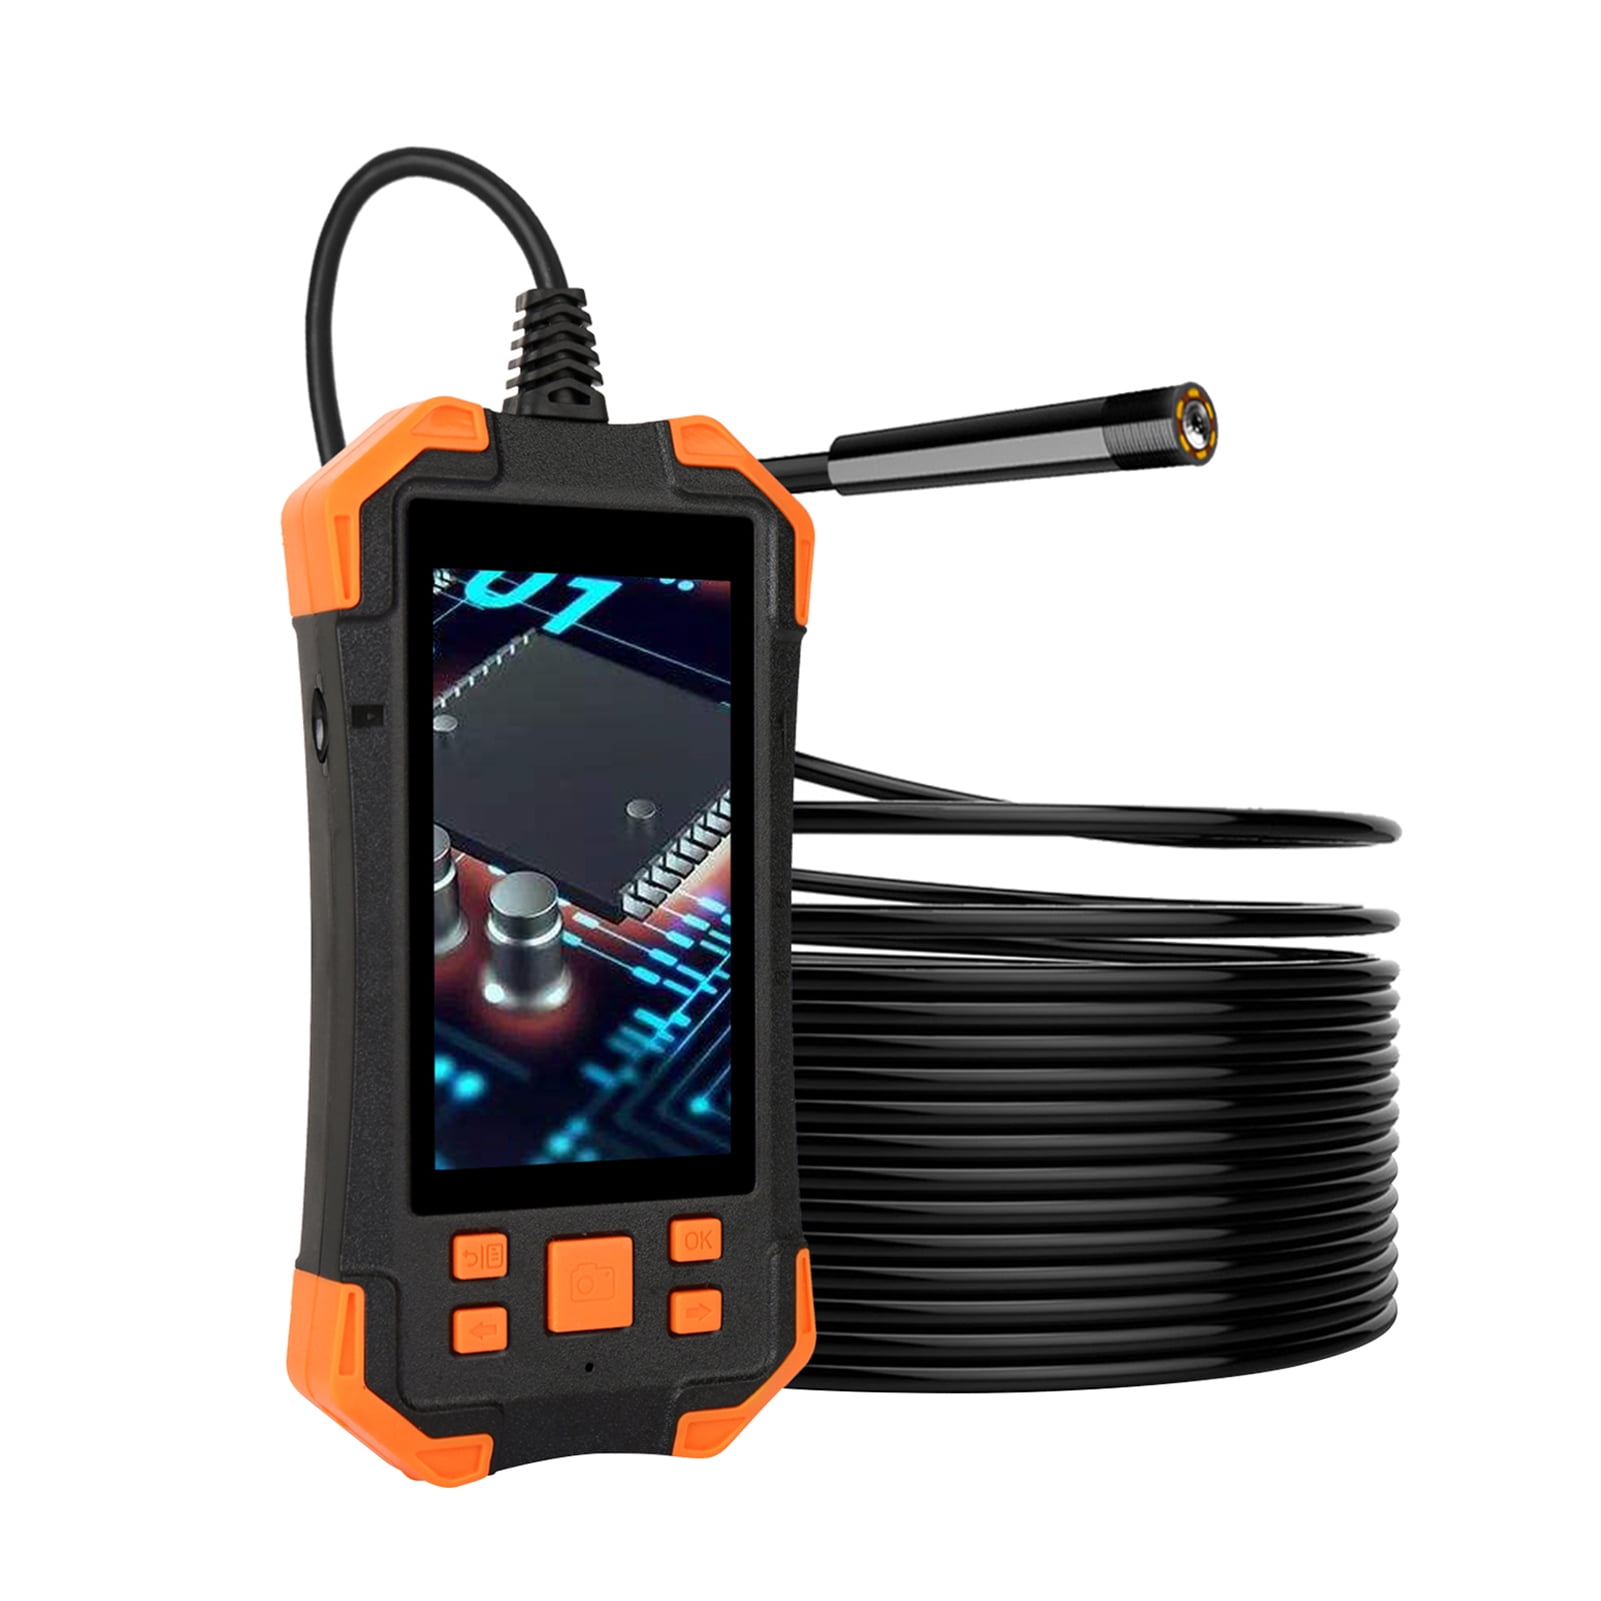 2M Endoscope Industrial 4.3 in IPS Screen Borescope Camera IP67 Waterproof 1080P HD 5.5mm Lens Inspection Camera with 6 LED Lights and Semi-Rigid Cable 